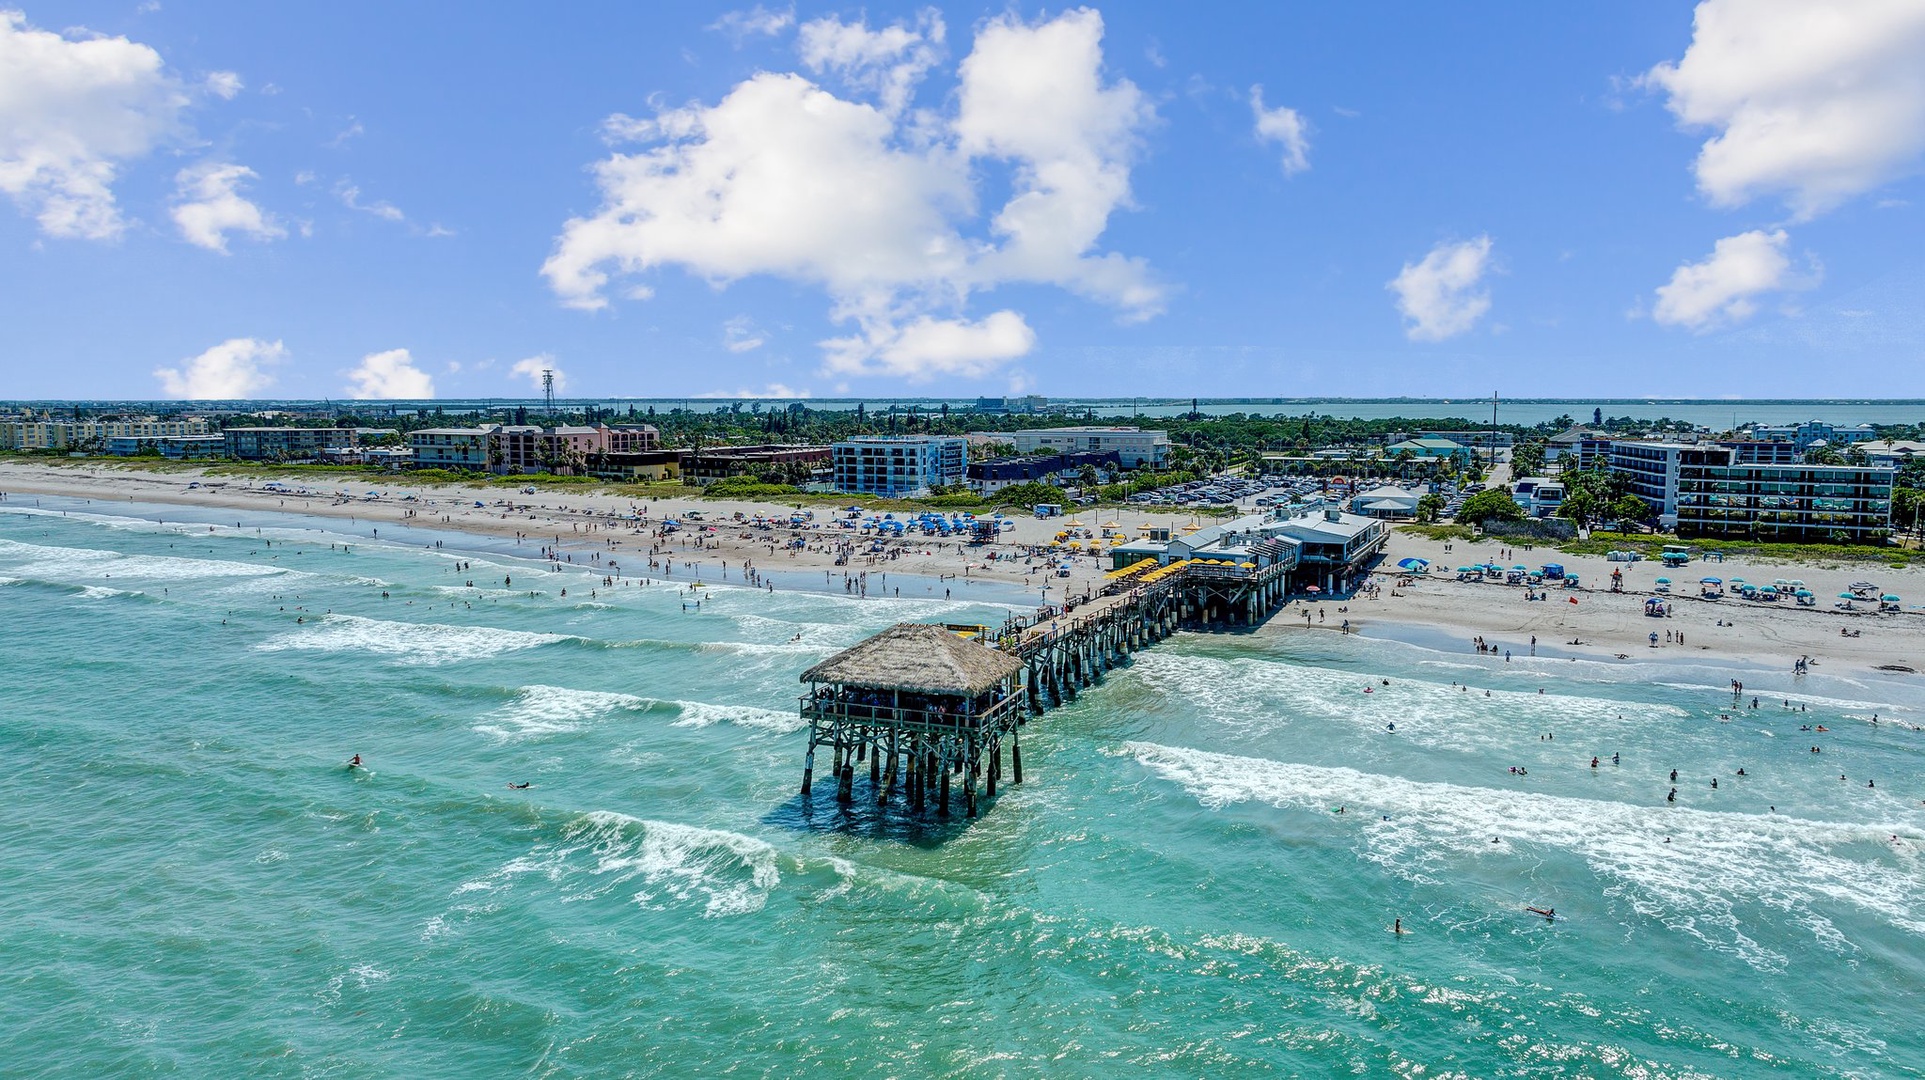 Westgate Cocoa Beach Pier is a only short walk away!